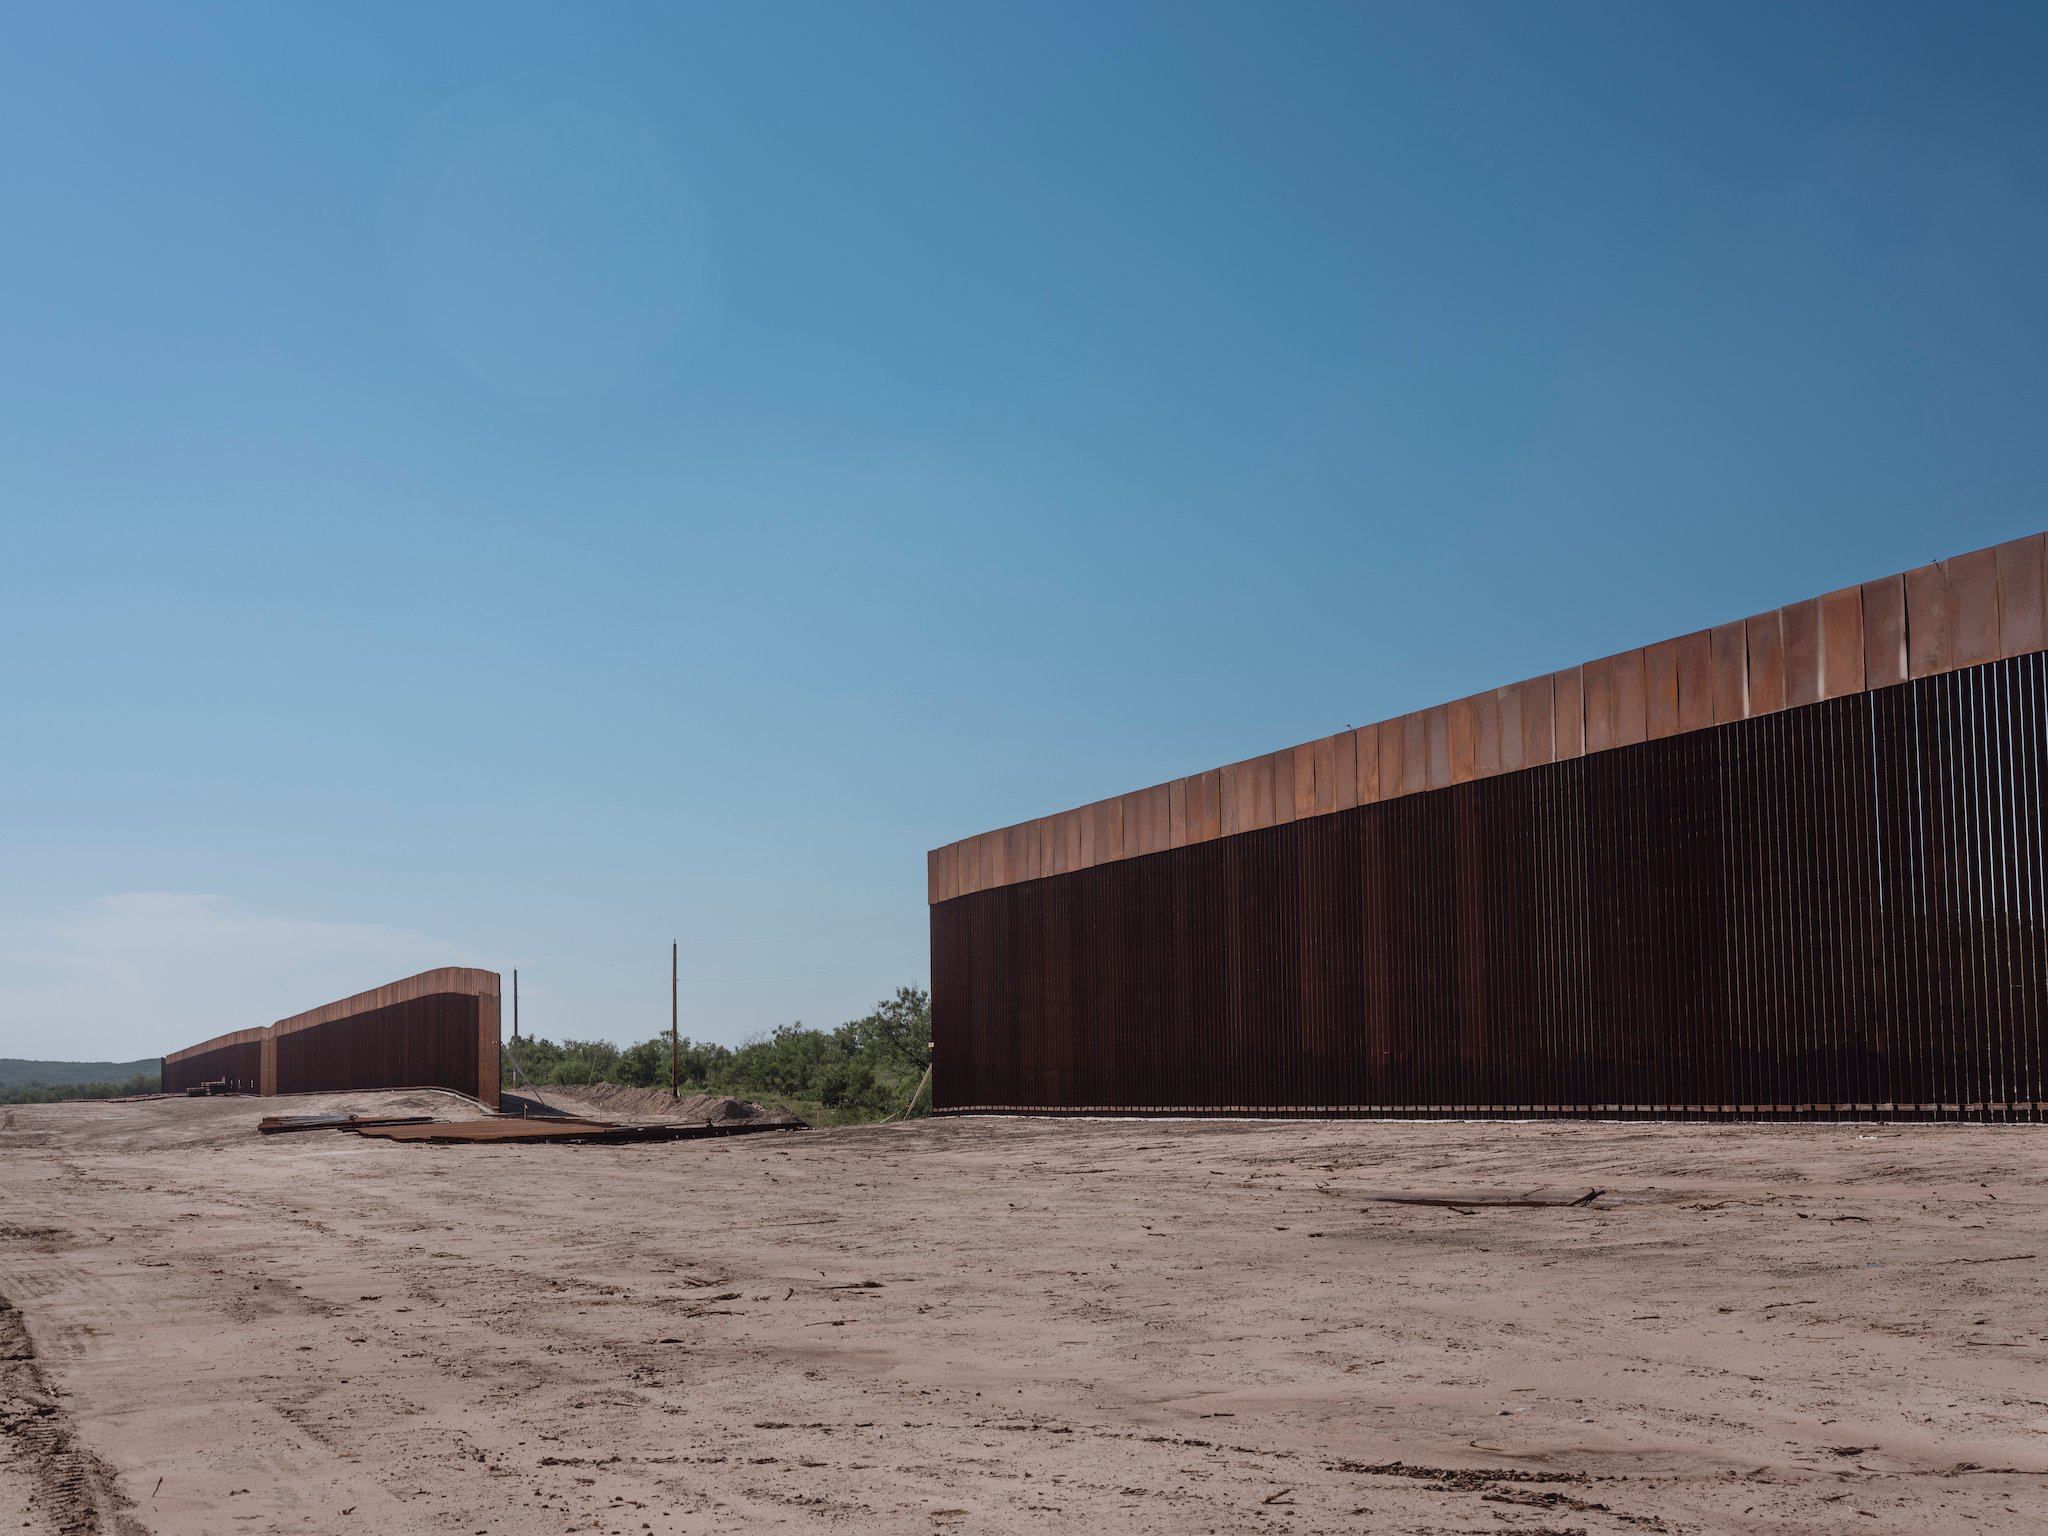 A section of the border wall in Del Rio, Texas. There is a large gap where the wall is unfinished. It is surrounded by dusty desert and low plants.